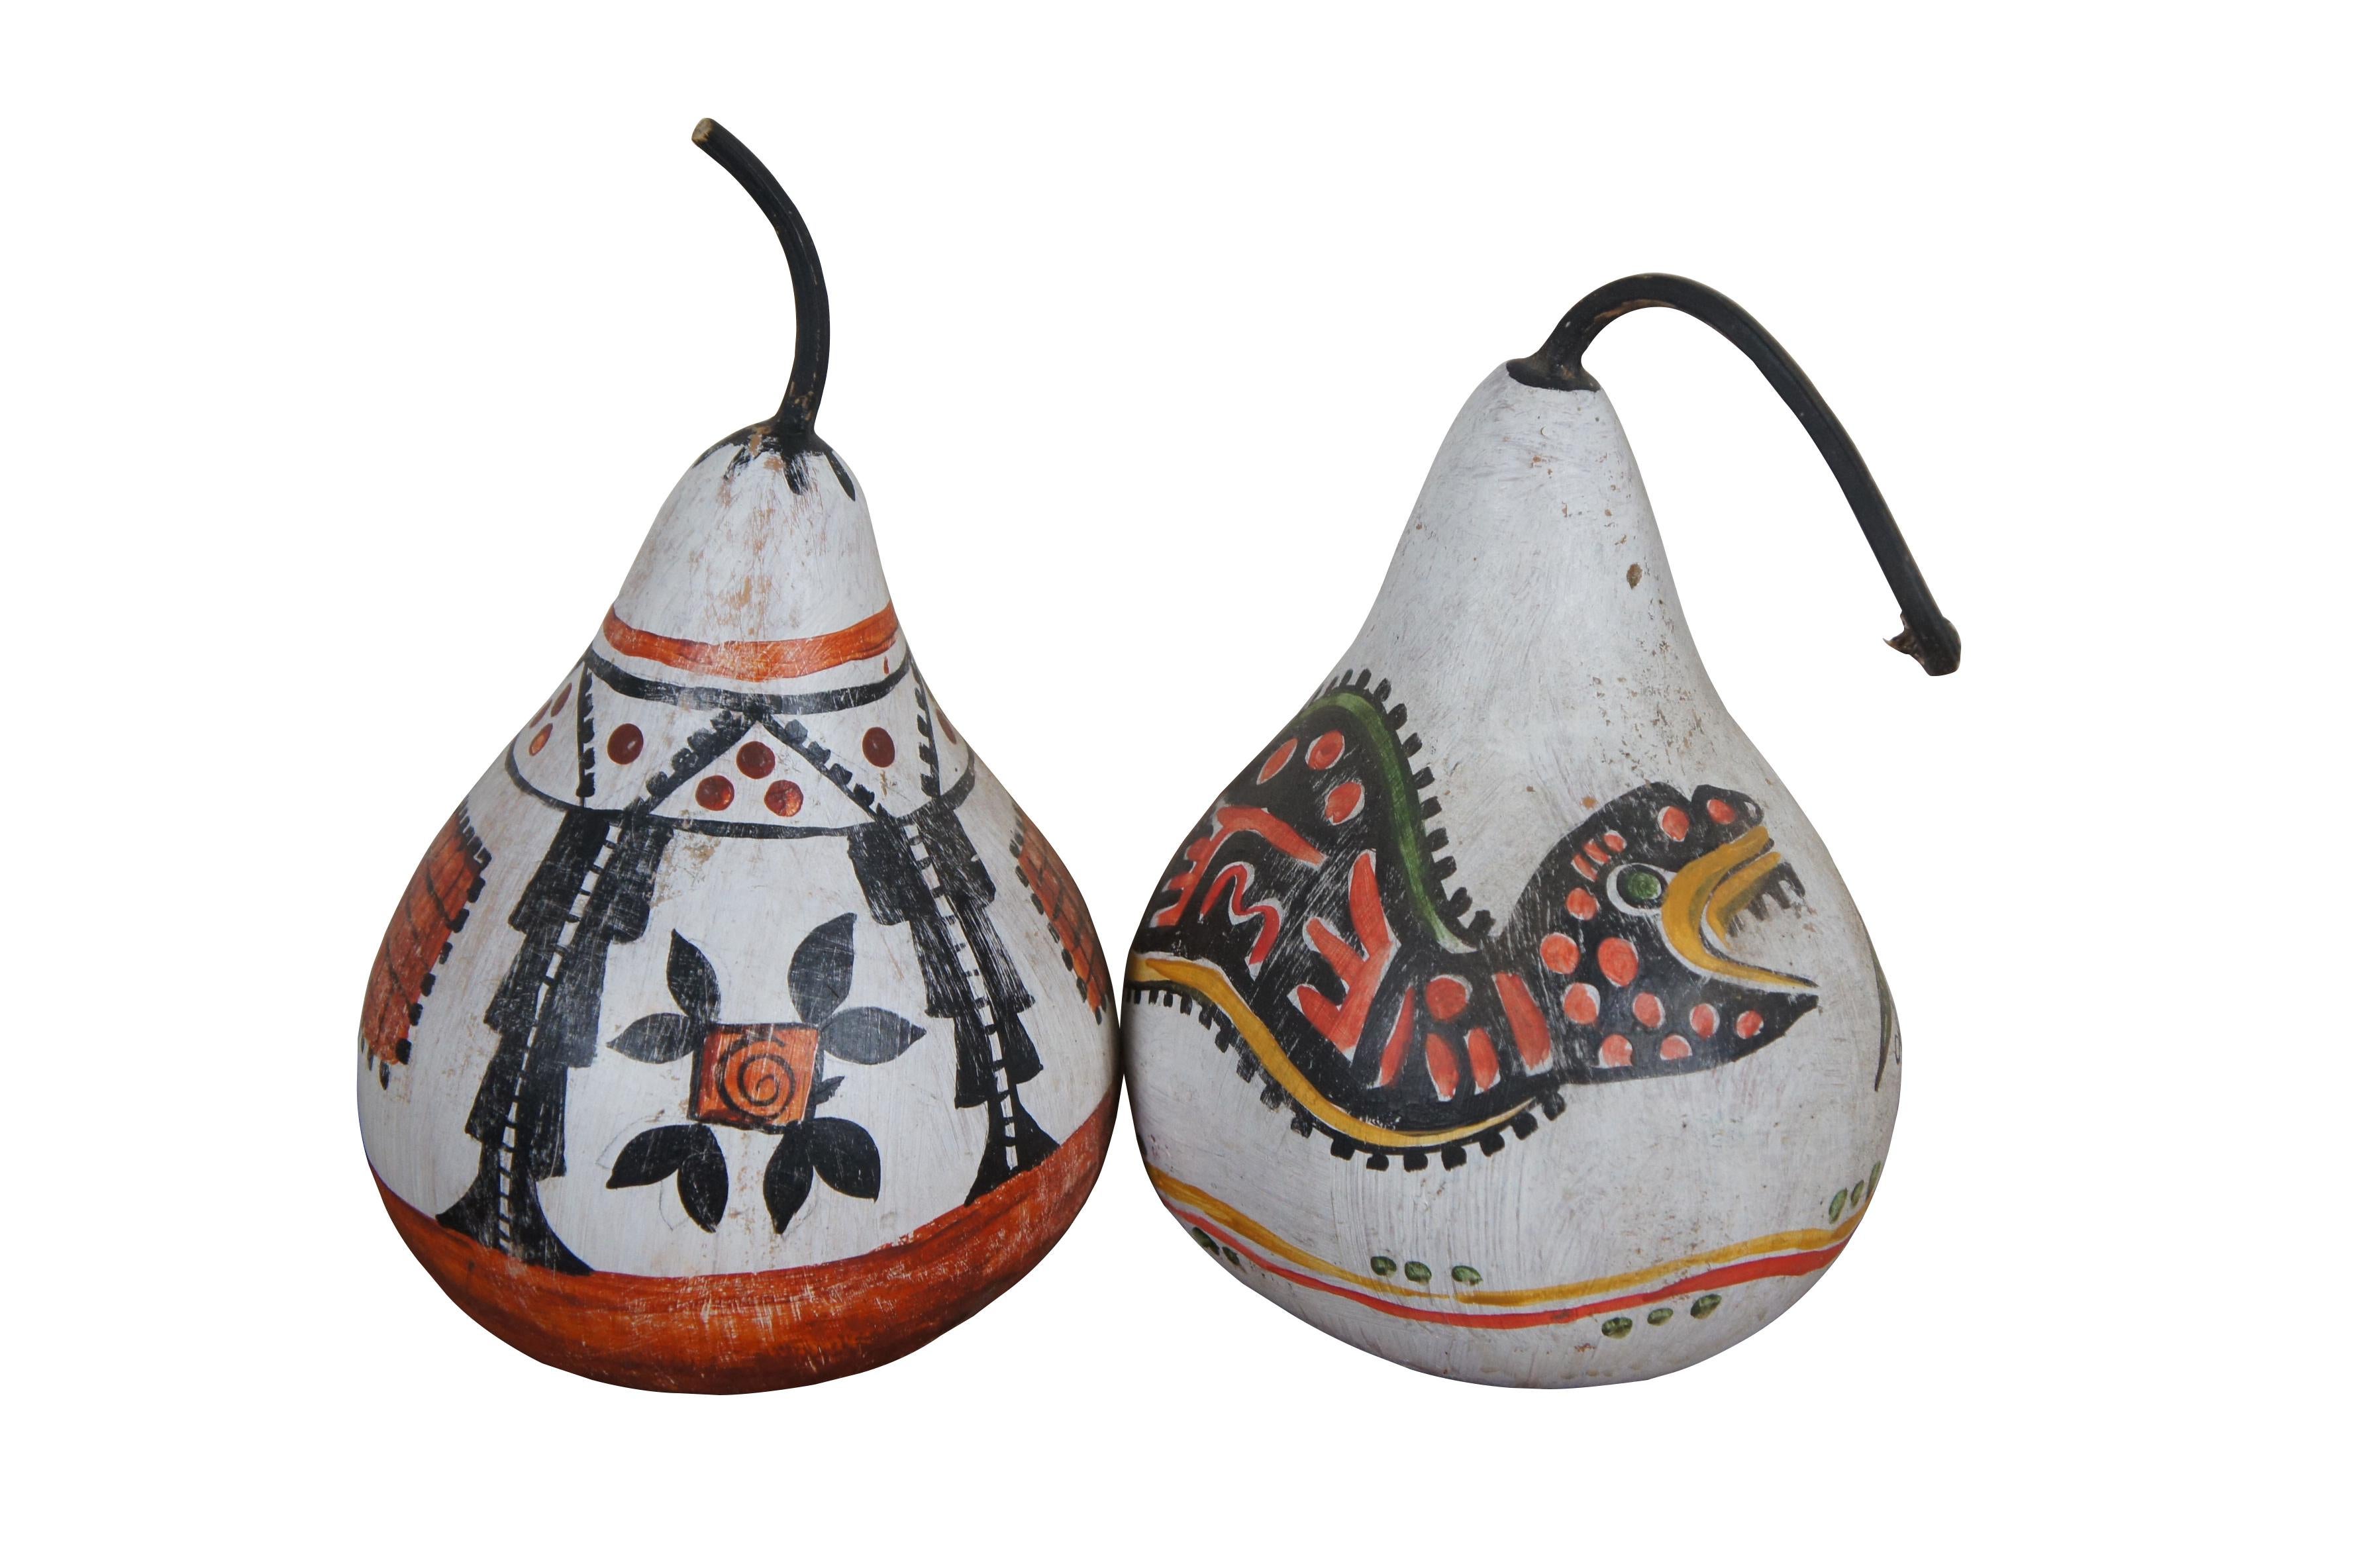 Lot of five late 20th century native Southwestern folk art hand painted gourds. Variety of colors and pattern motifs including a snake and a Pueblo Bird. Two signed CH 2011.

Dimensions:
6.5